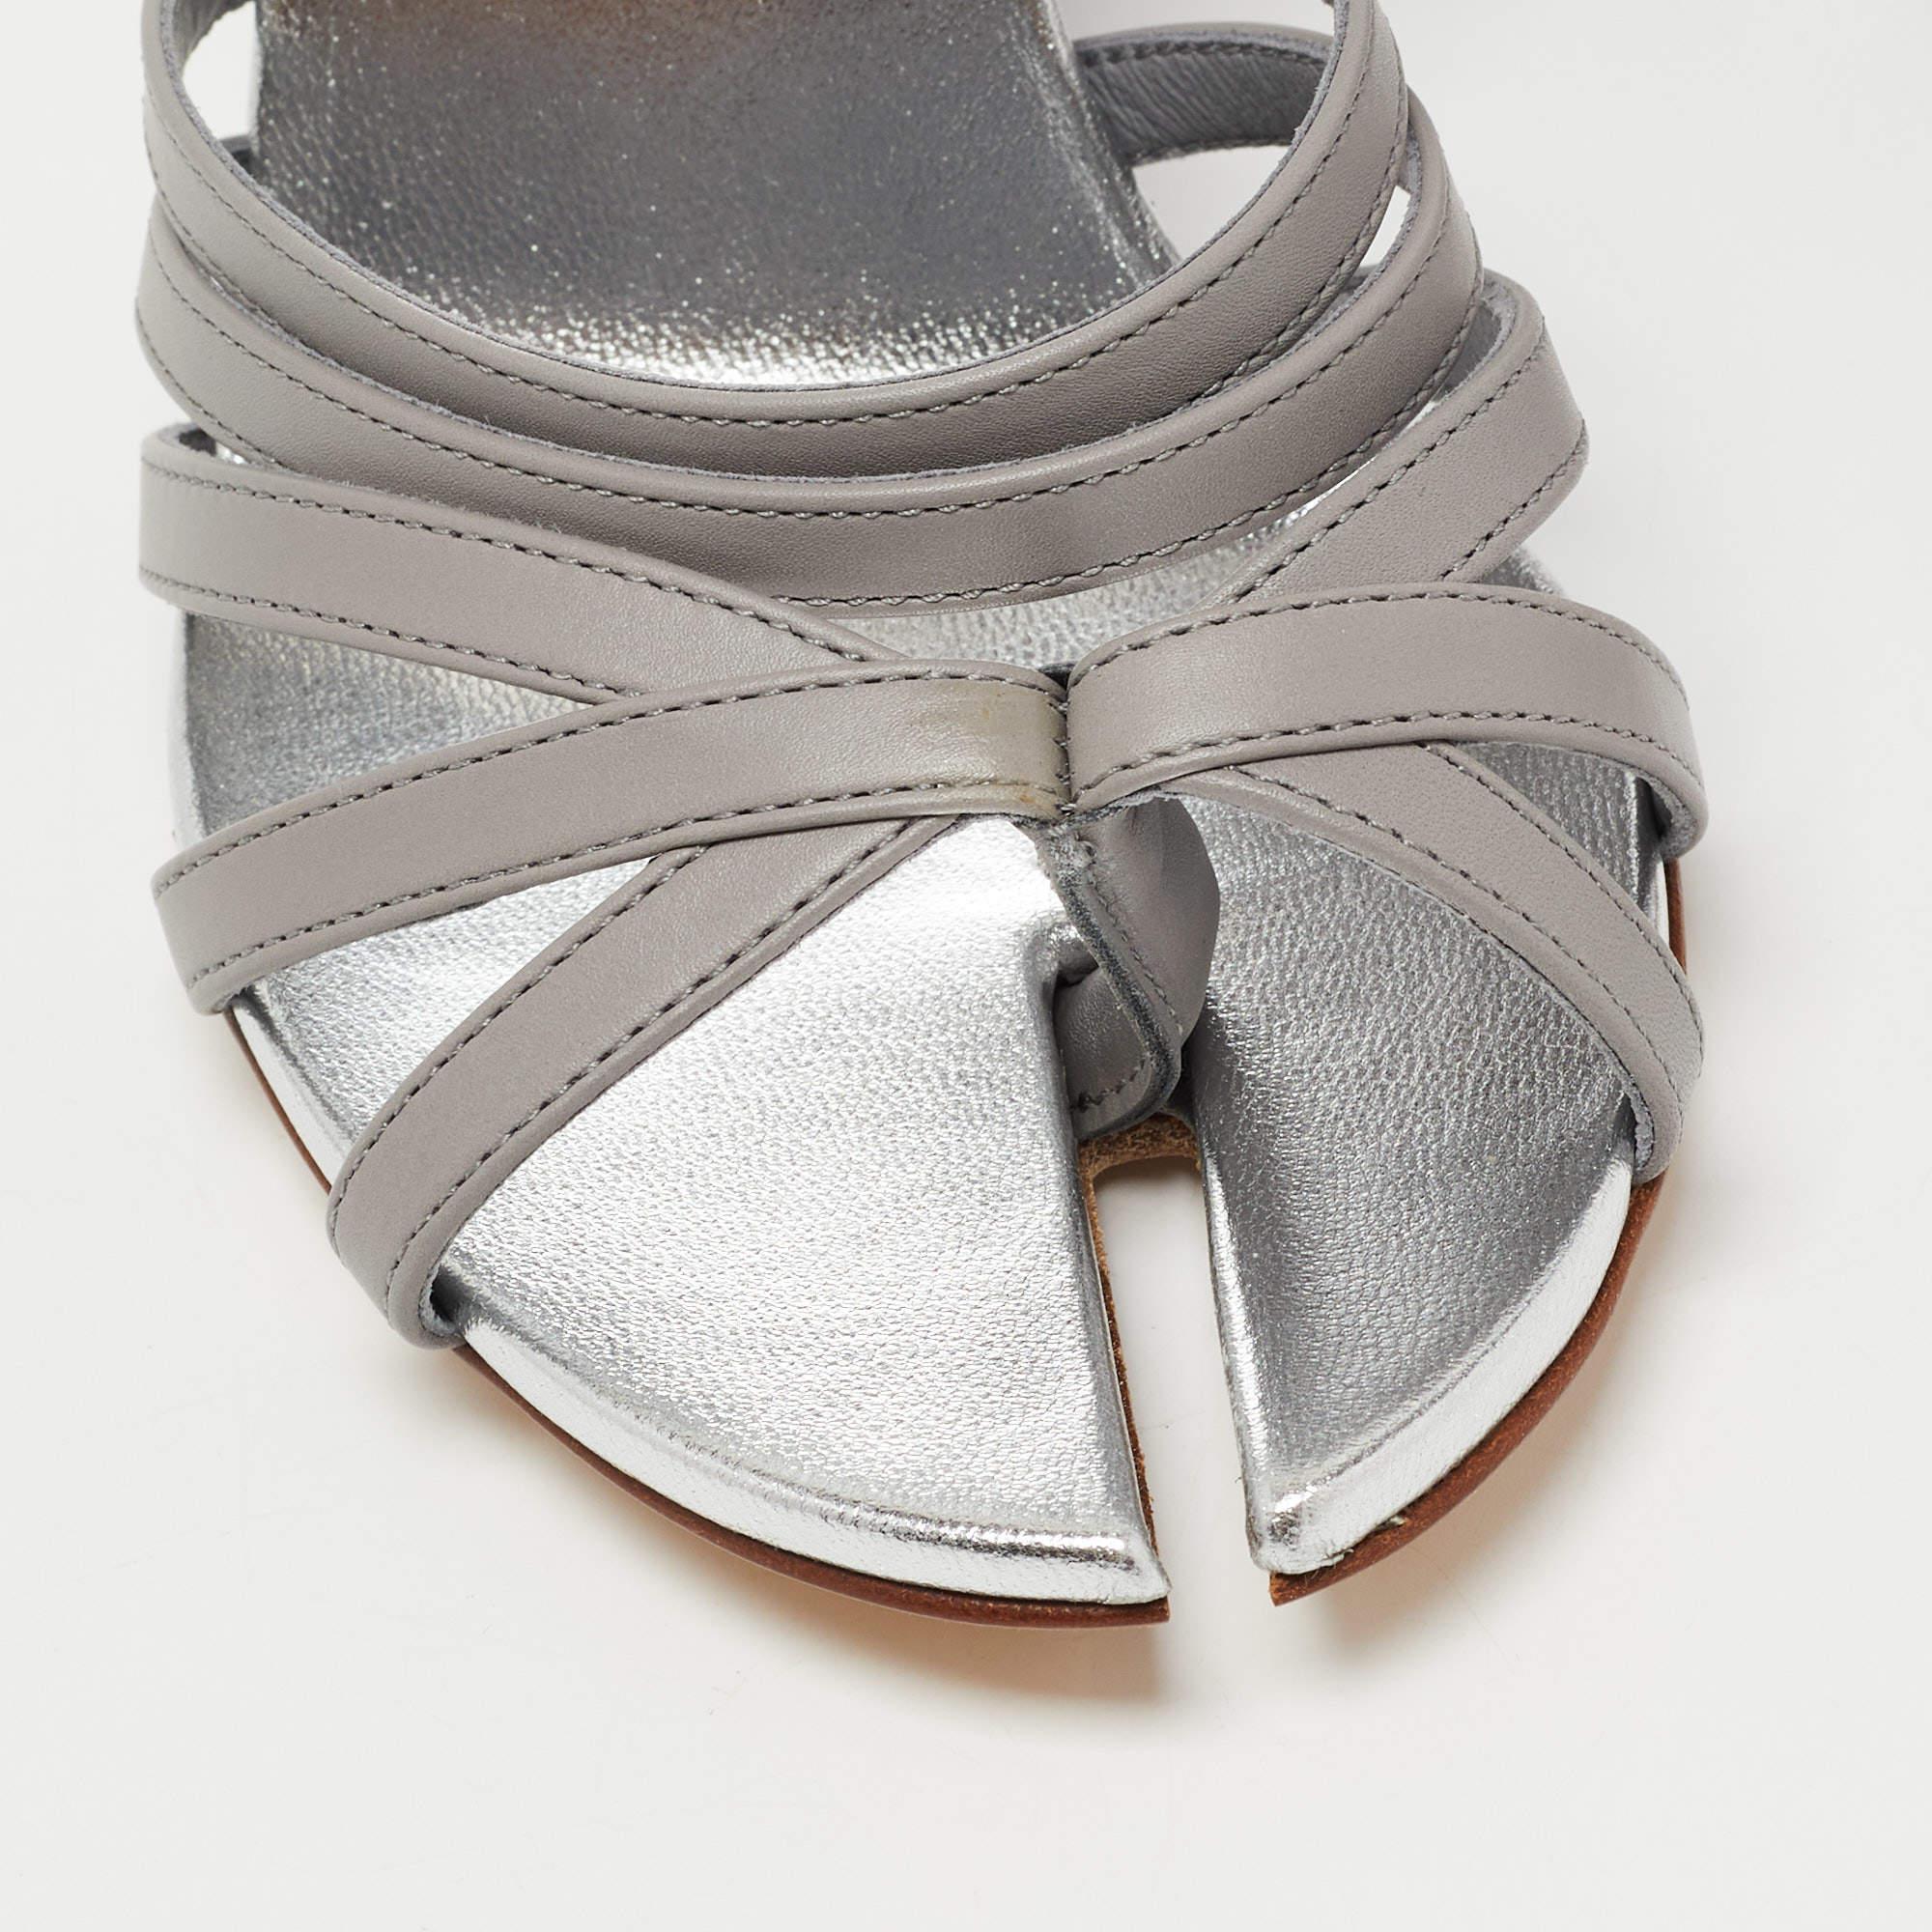 Burberry Grey Leather Hove Ankle Strap Sandals Size 36 1